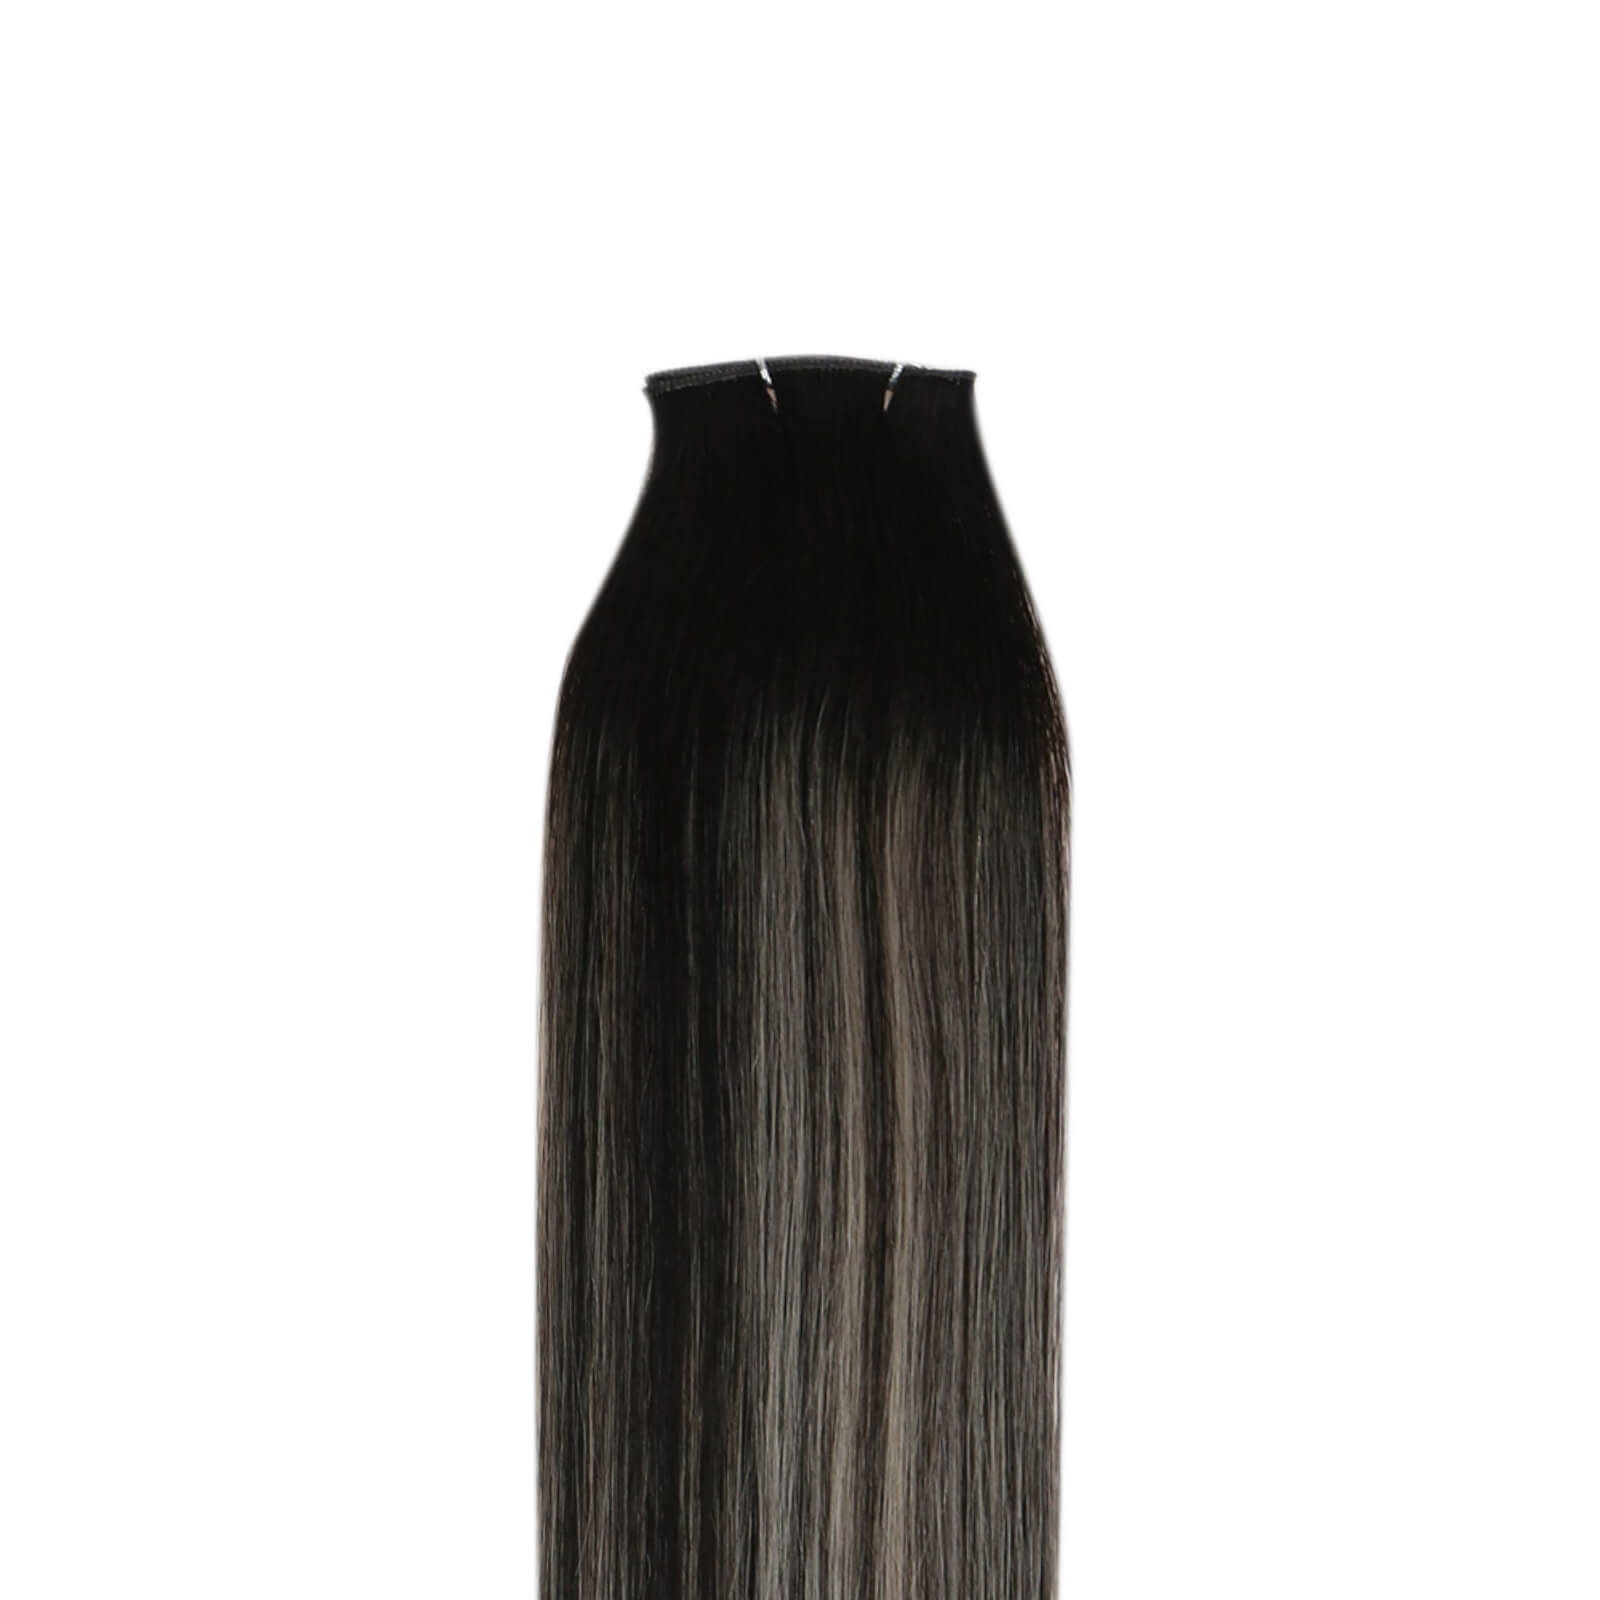 Genius Weft Extensions Virgin Hair Black with Sliver #1B/Sliver/1B Real Human Hair Easyouth